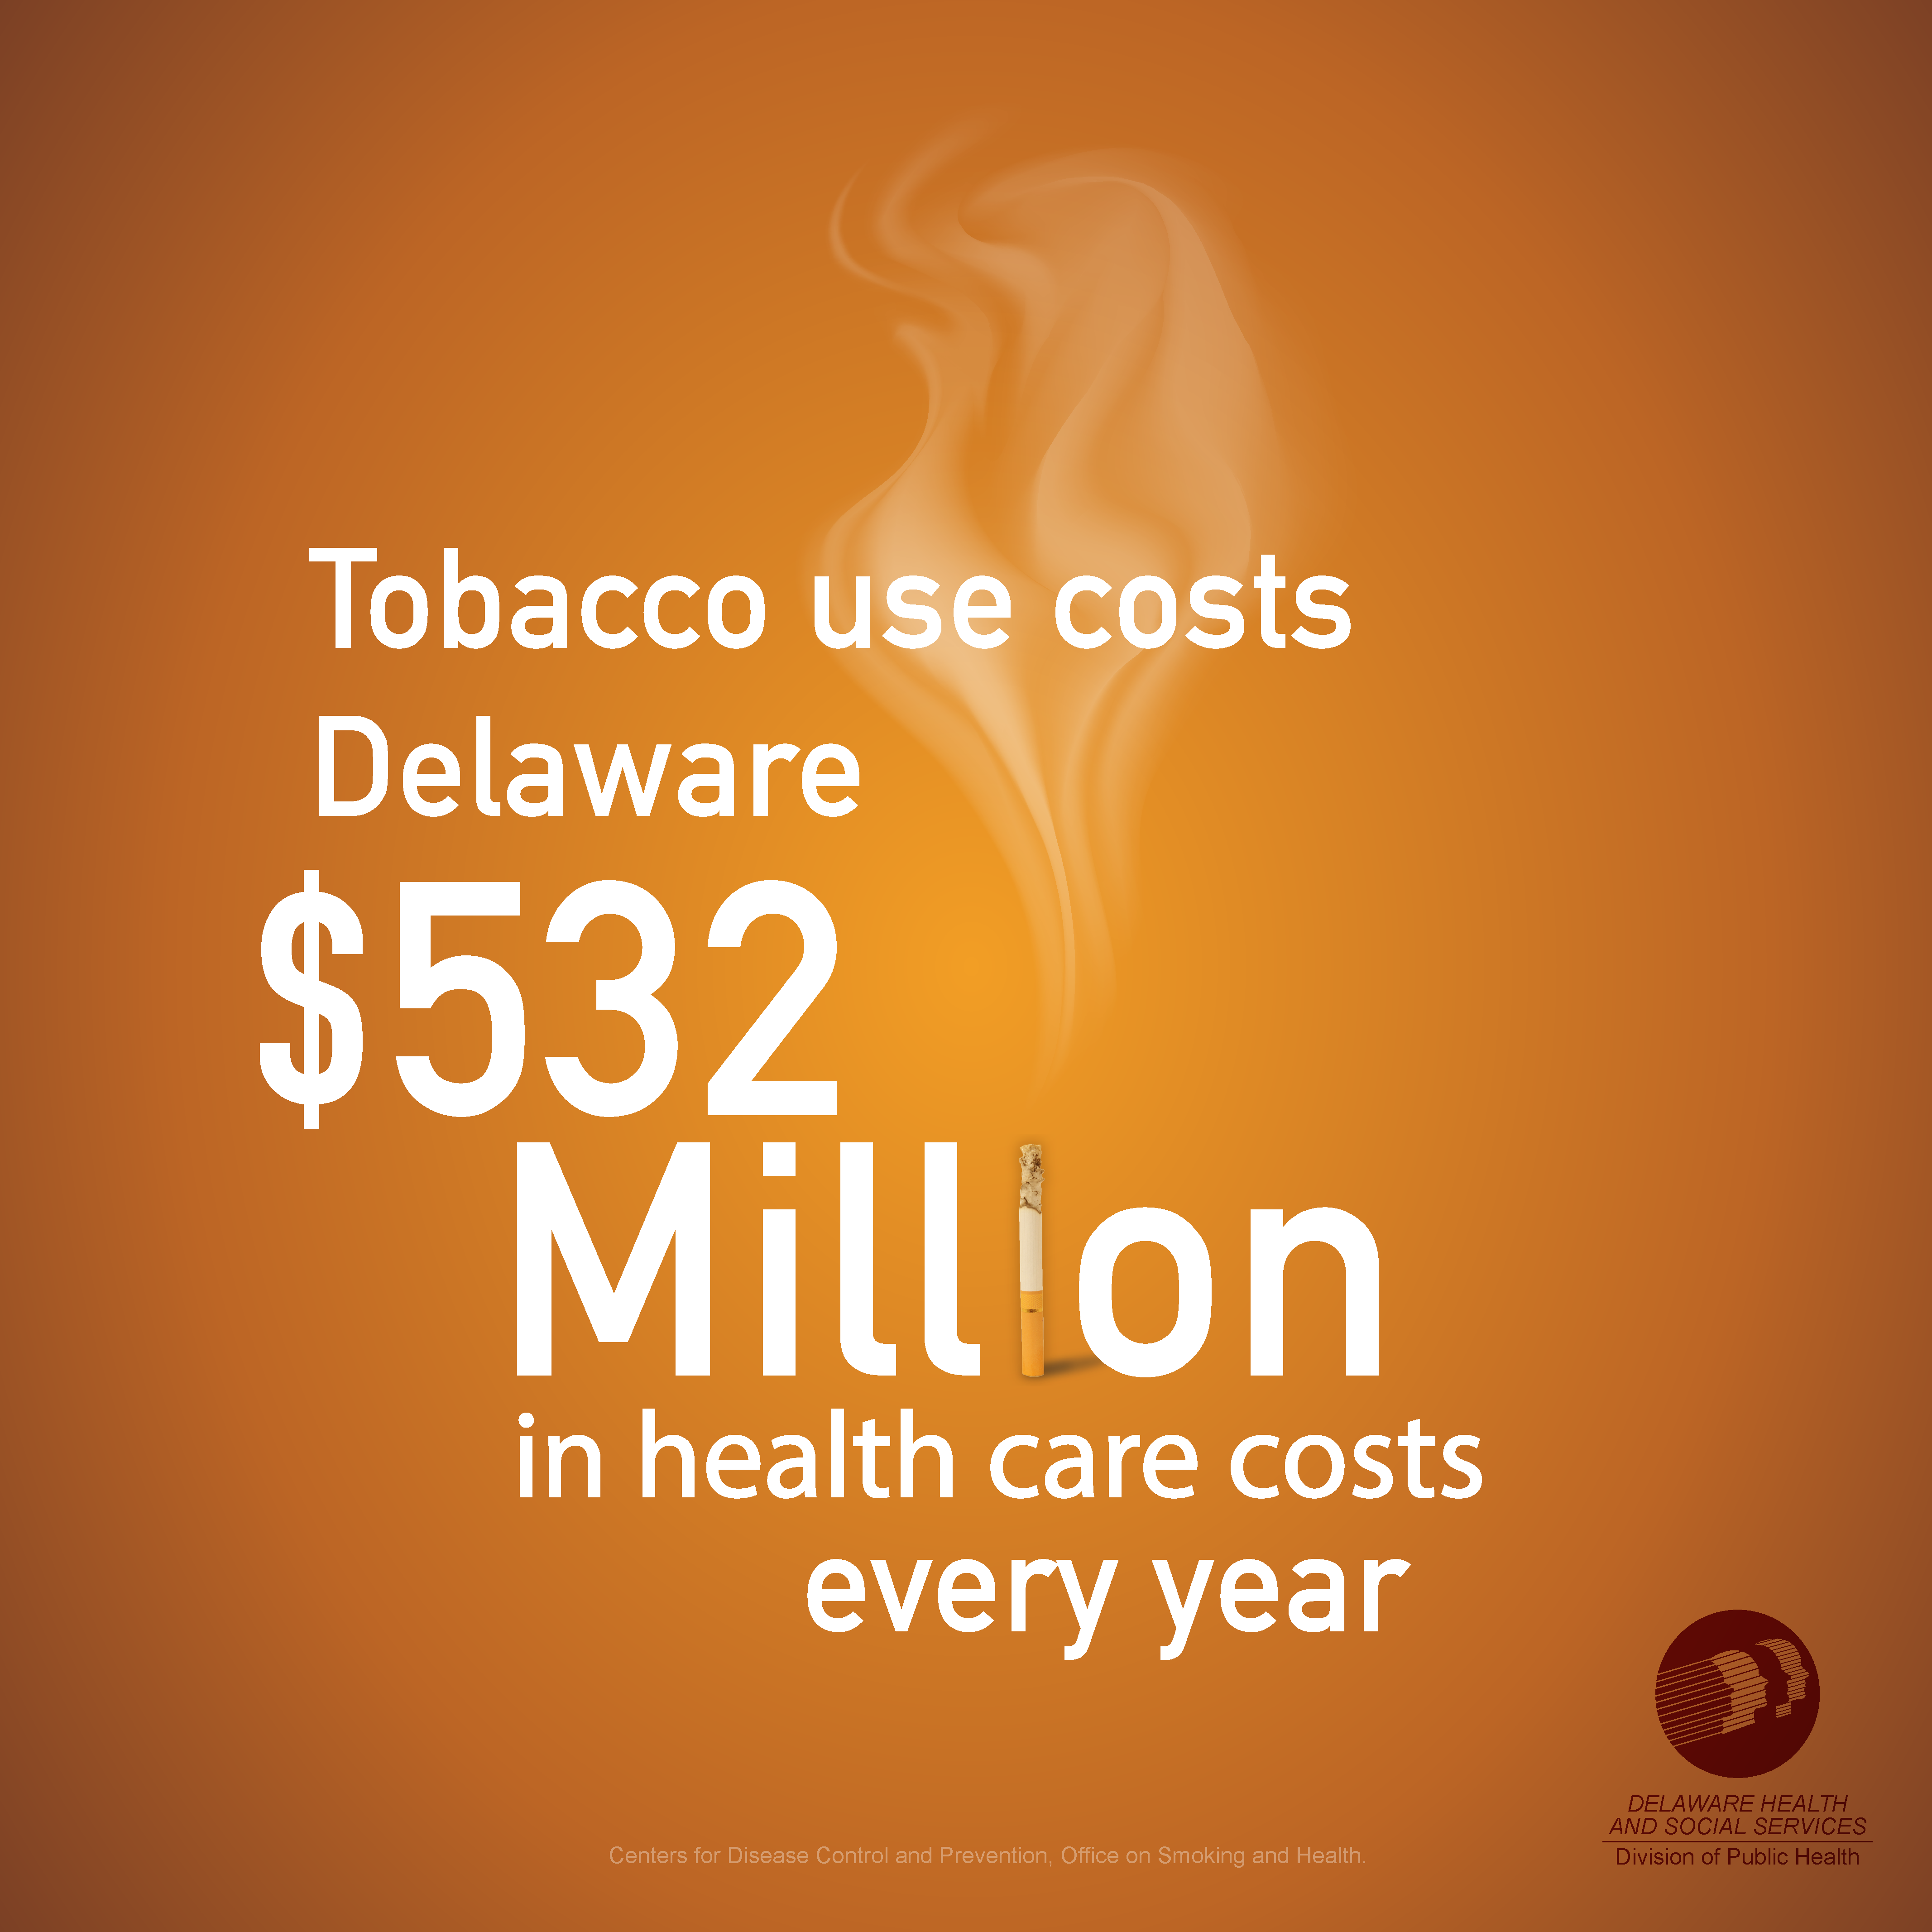 Tobacco use costs Delaware $352 million in health care costs every year